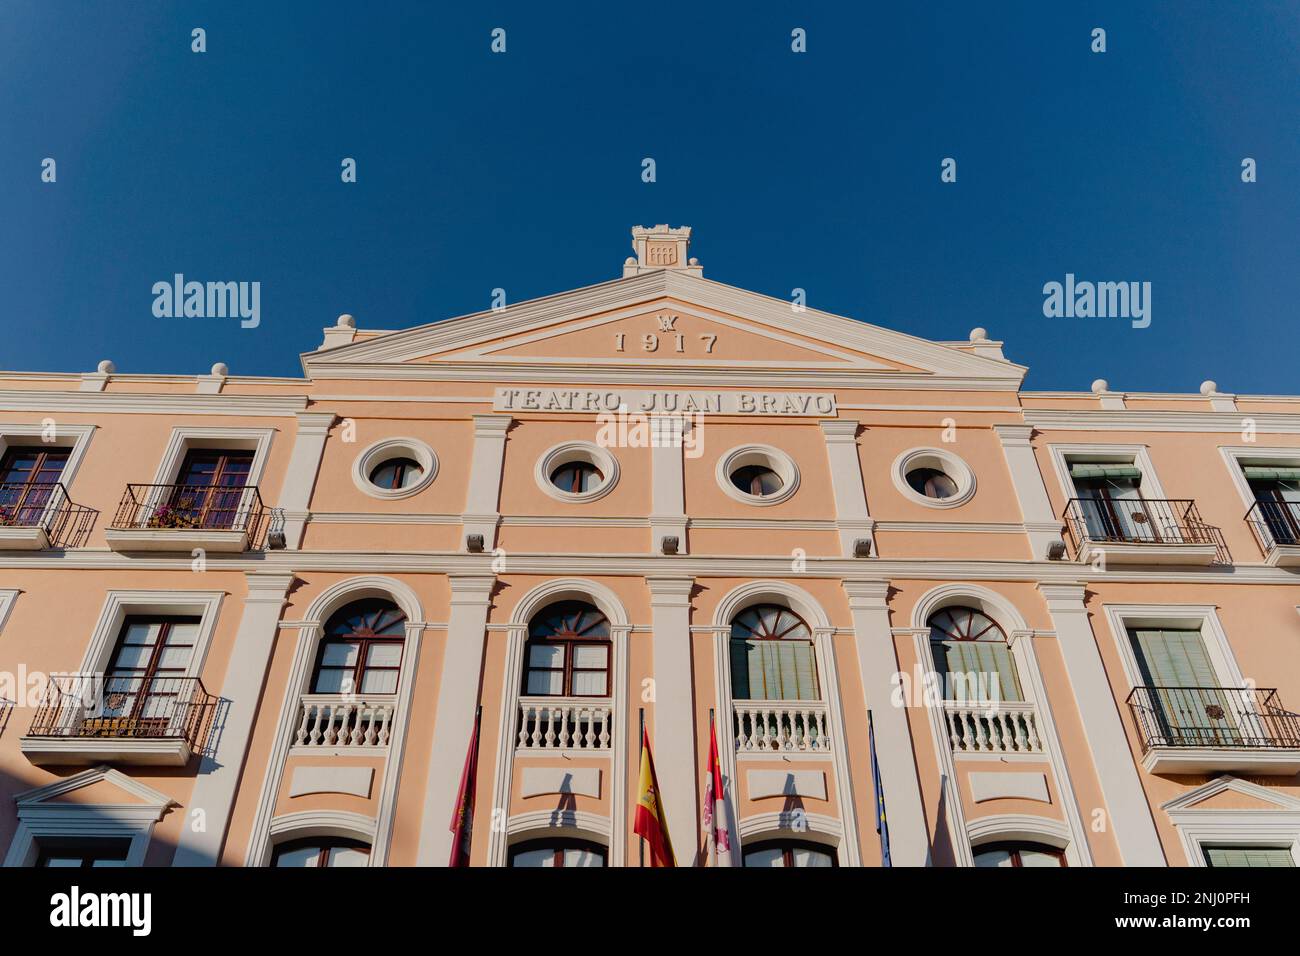 A front facade of the Juan Bravo theater on the Plaza Mayor square Stock Photo